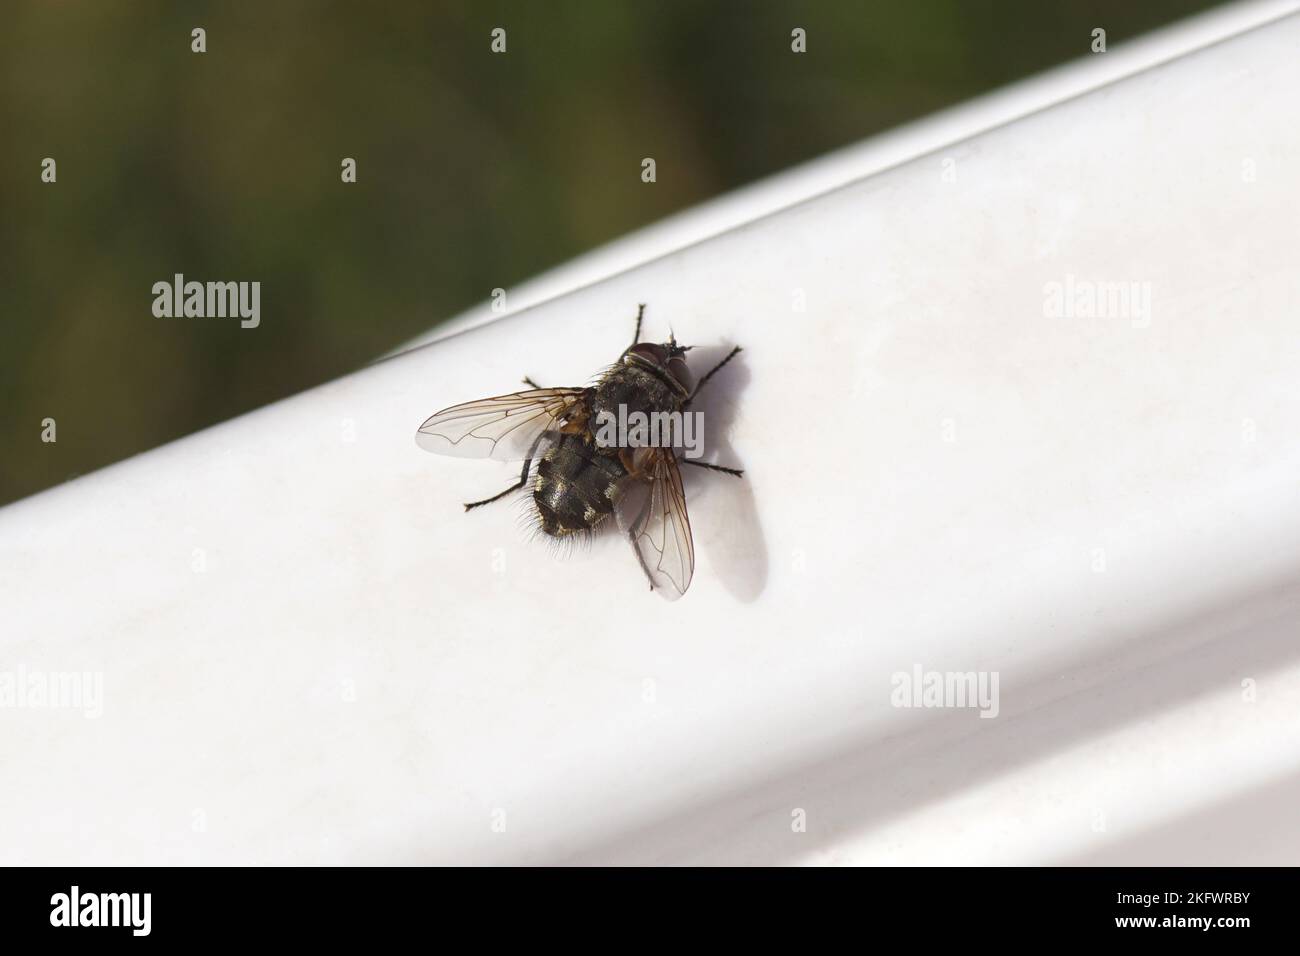 Male cluster fly (Pollenia) family Calliphoridae on a white edge in the sun. Blurred green garden. Spring. Netherlands, March Stock Photo